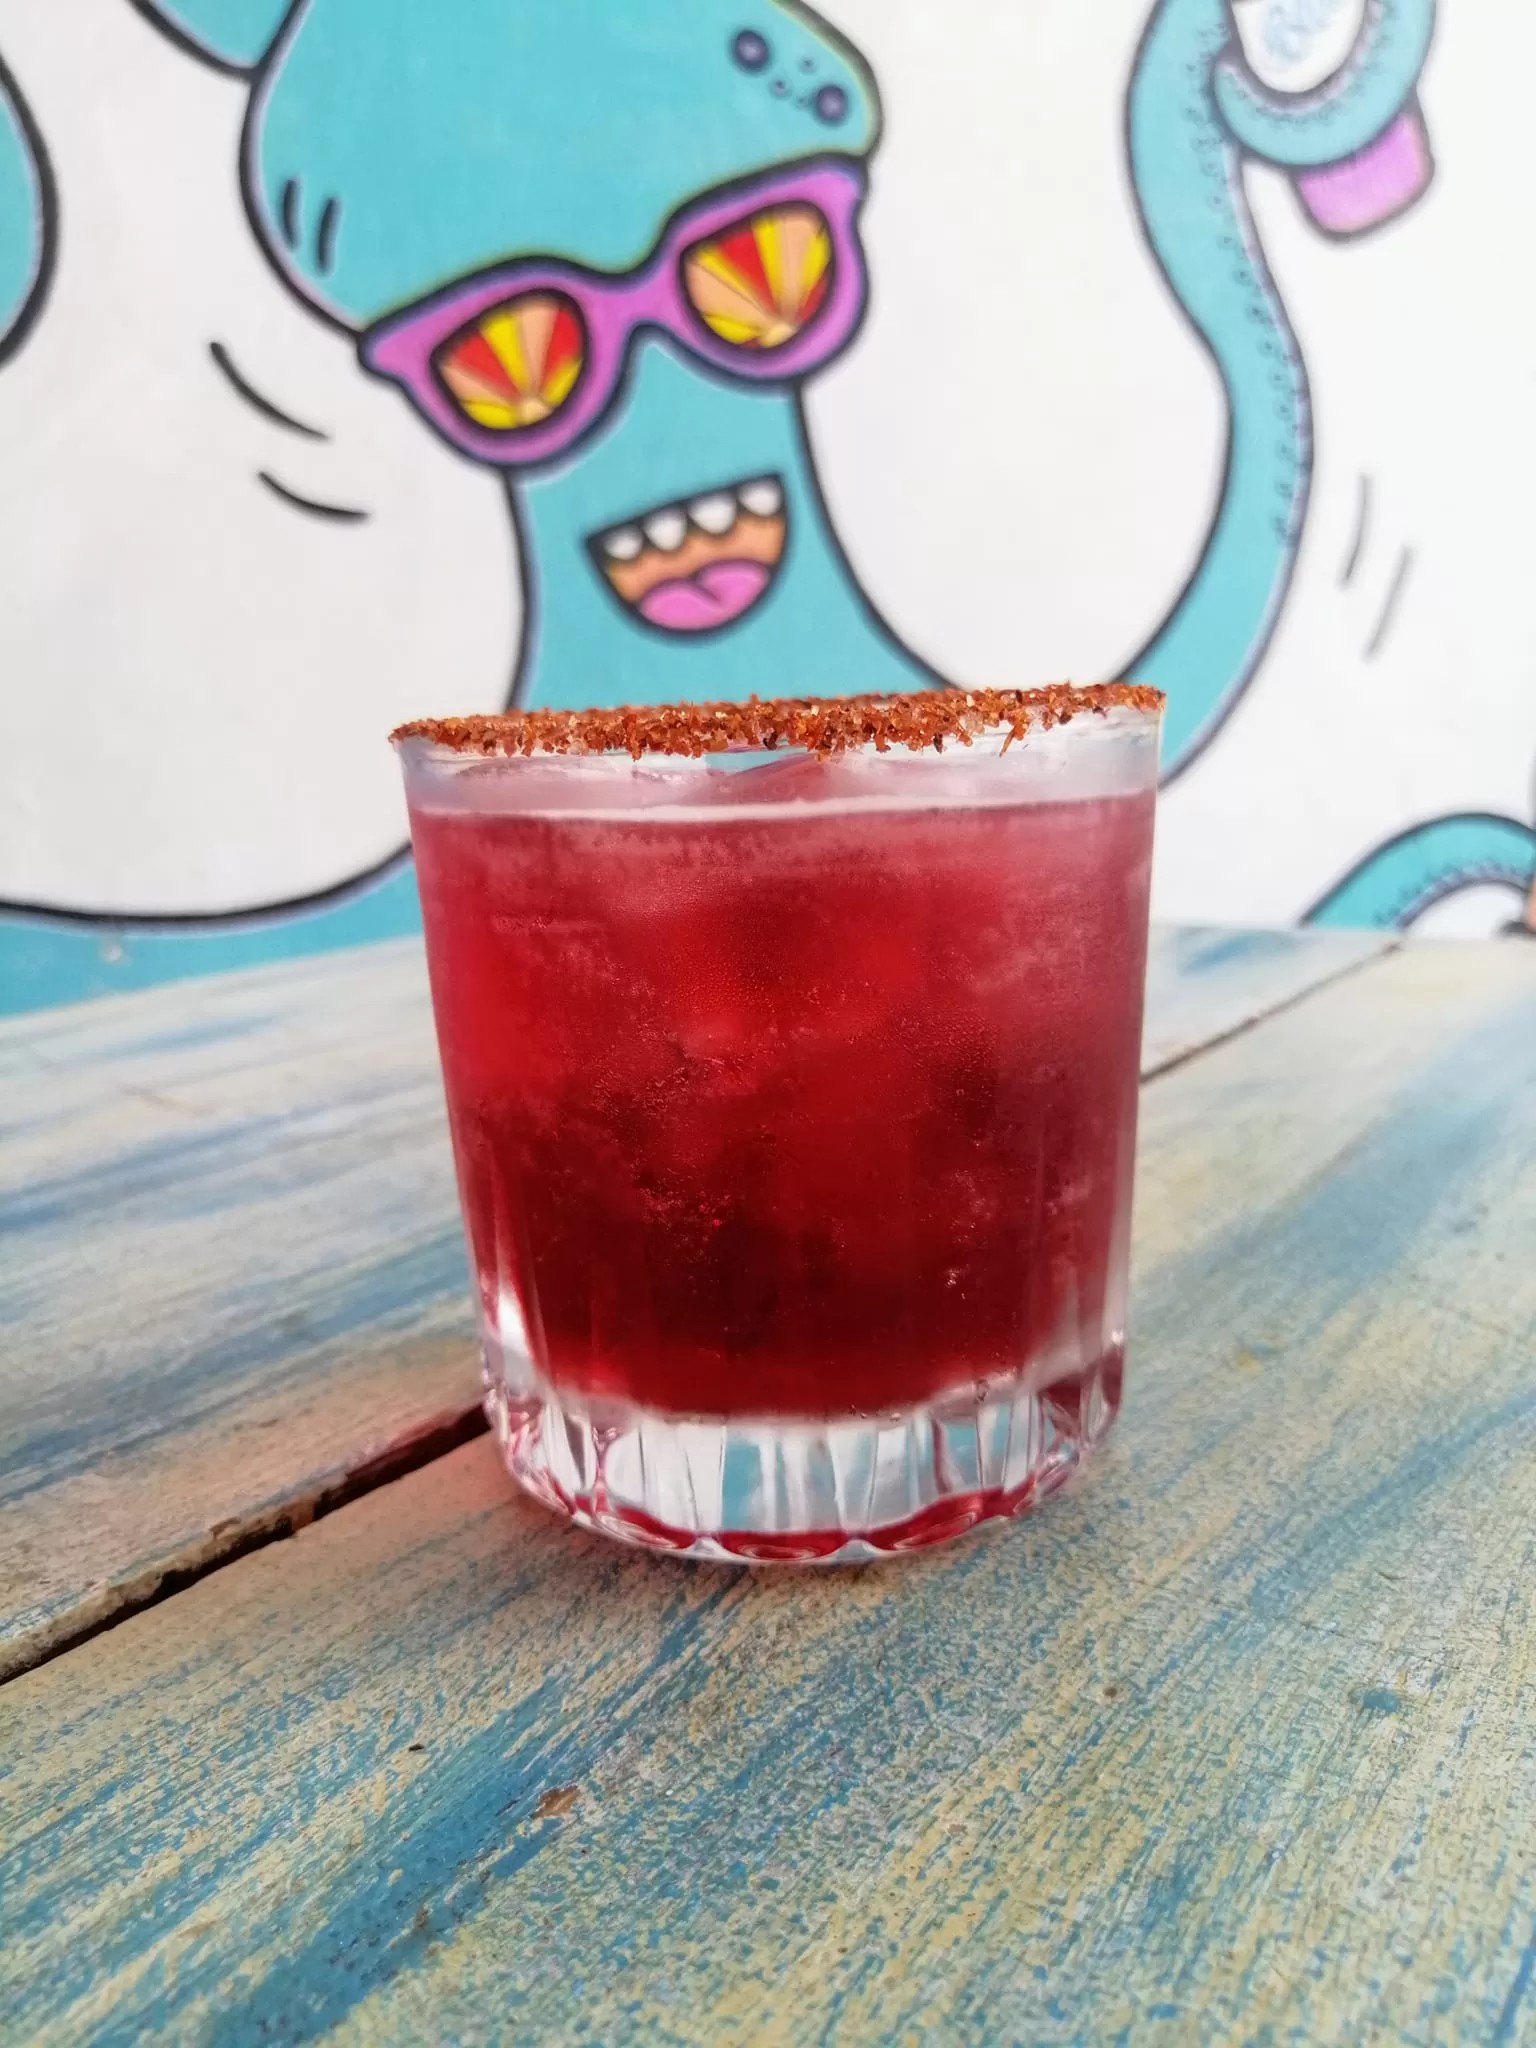 Glass rimmed with tajin and filled with red jamaica margarita. Blue octopus painted on the wall in the background.